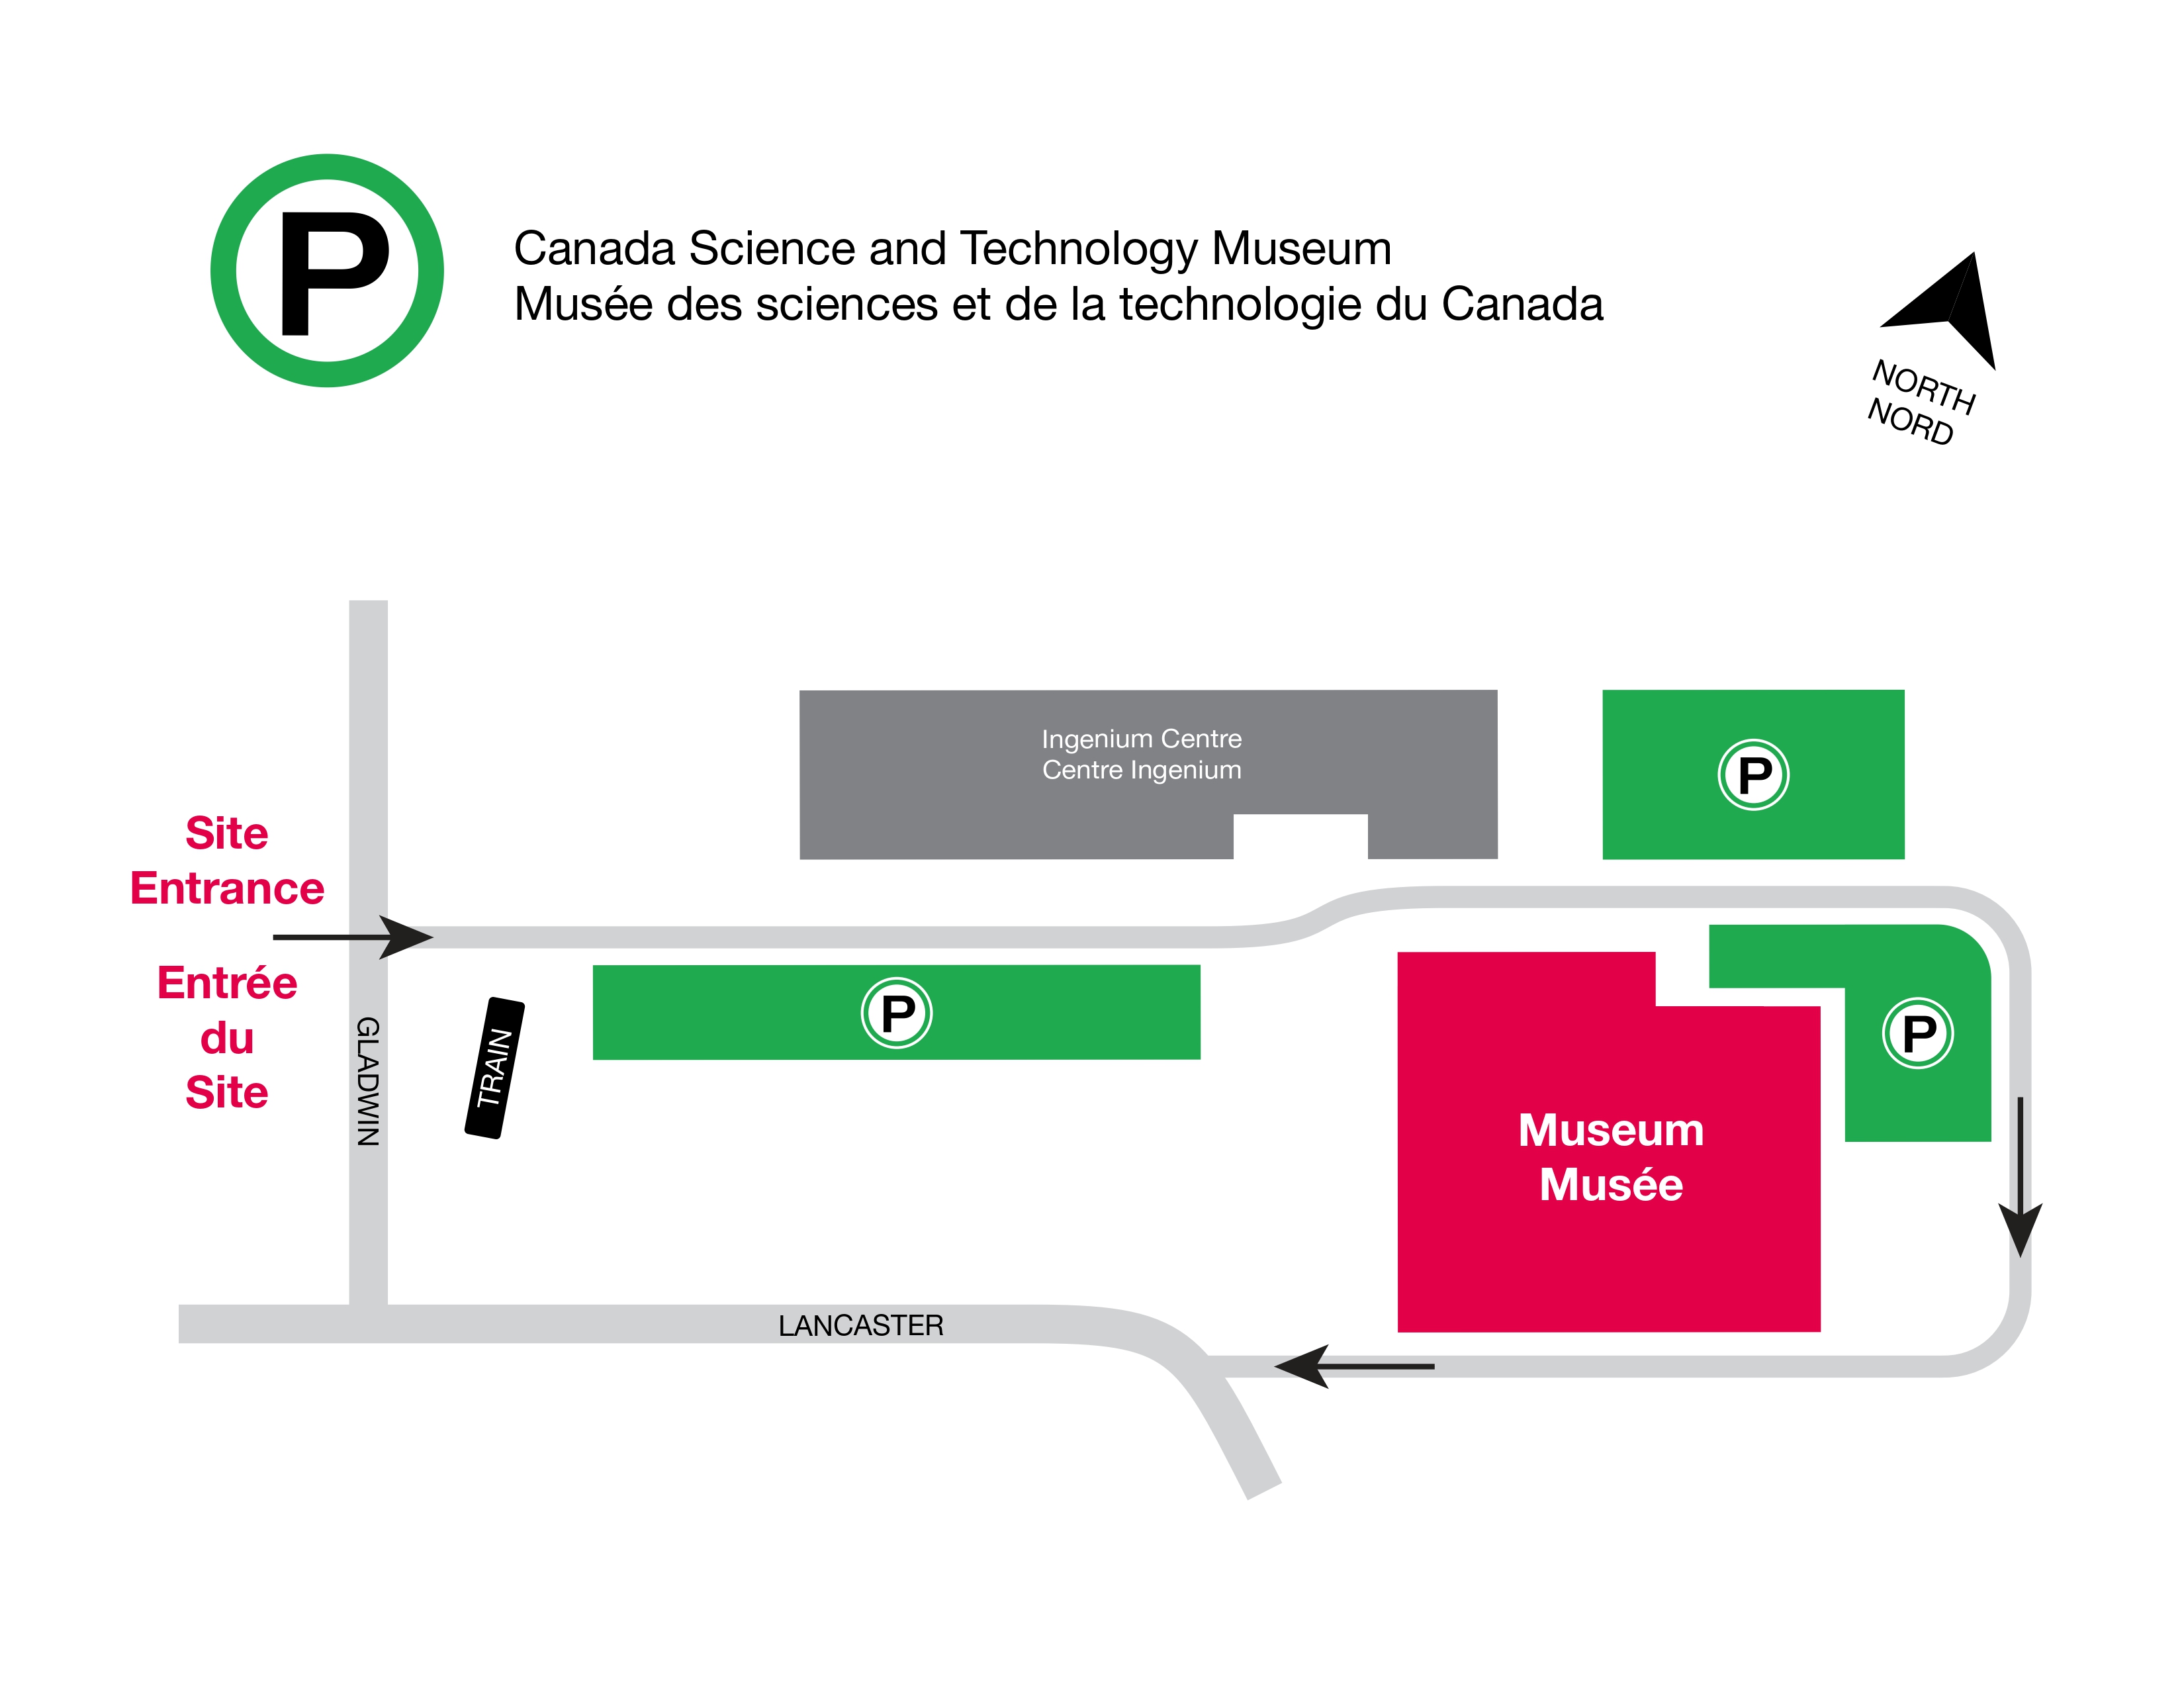 Graphic of a parking map to the museum, indicating the new entrance to the site on Gladwin Crescent. Wayfinding arrows indicate the parking areas on the site, located on the side and back of the museum. 